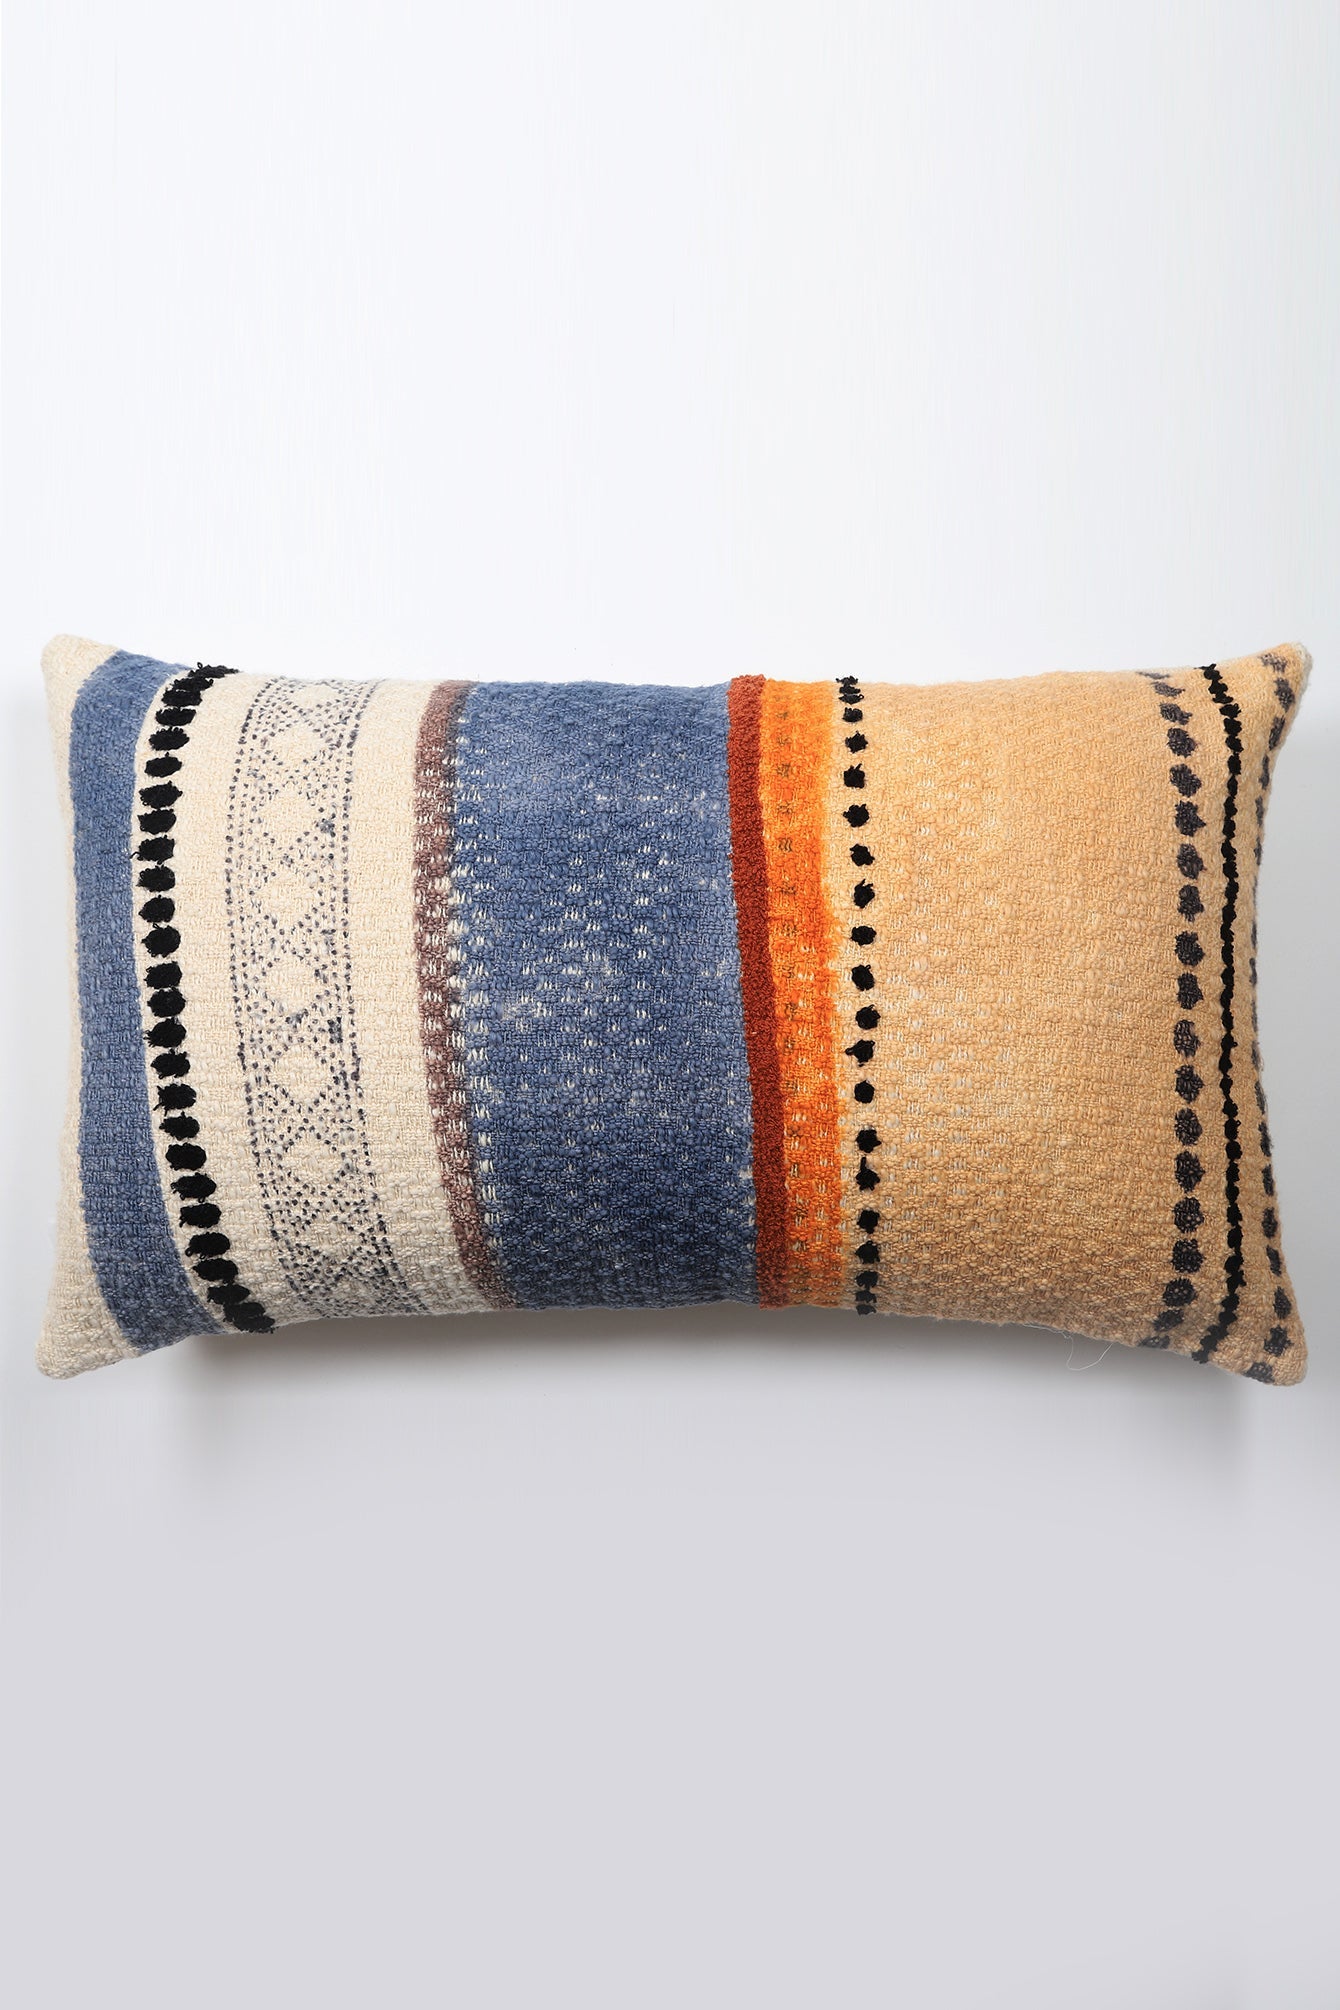 Burgas Embroidery Over Block Printed Cushion Cover